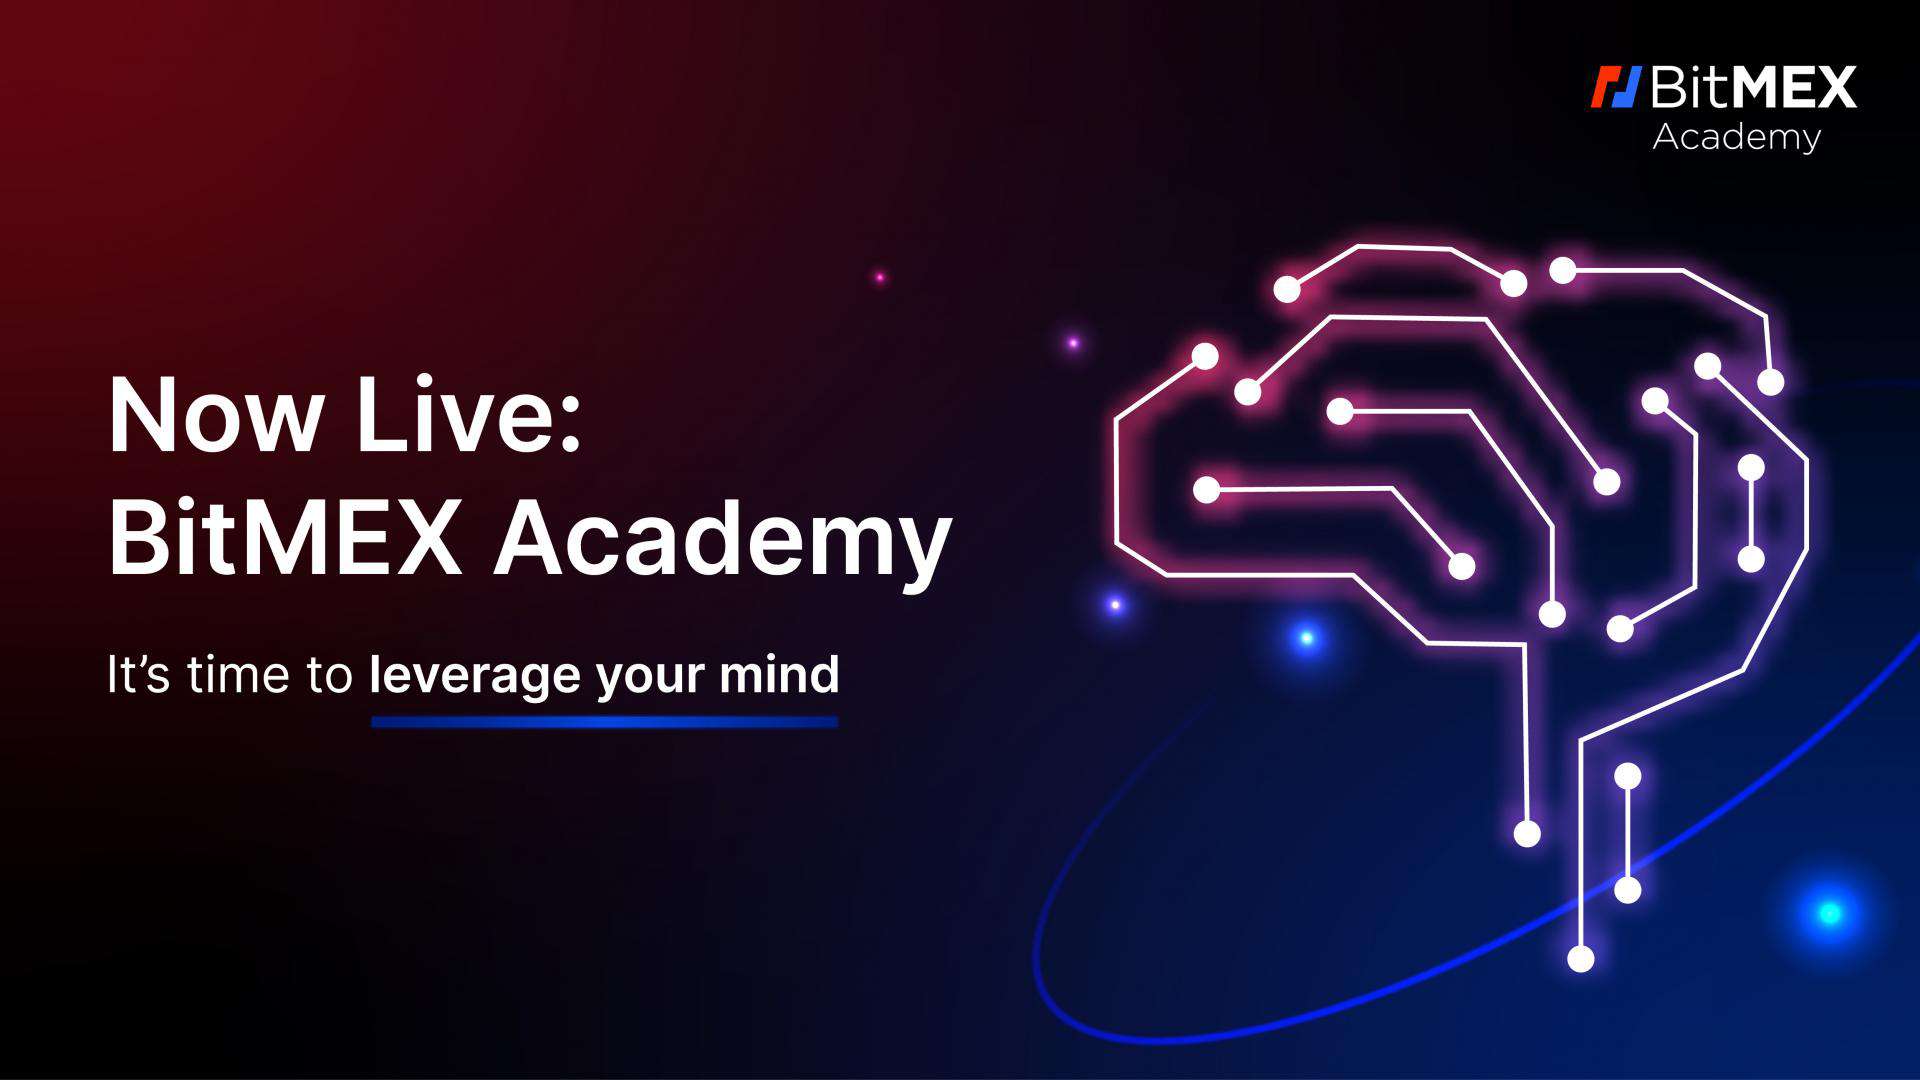 Bitmex-academy-launches-with-vision-to-raise-the-bar-for-crypto-education